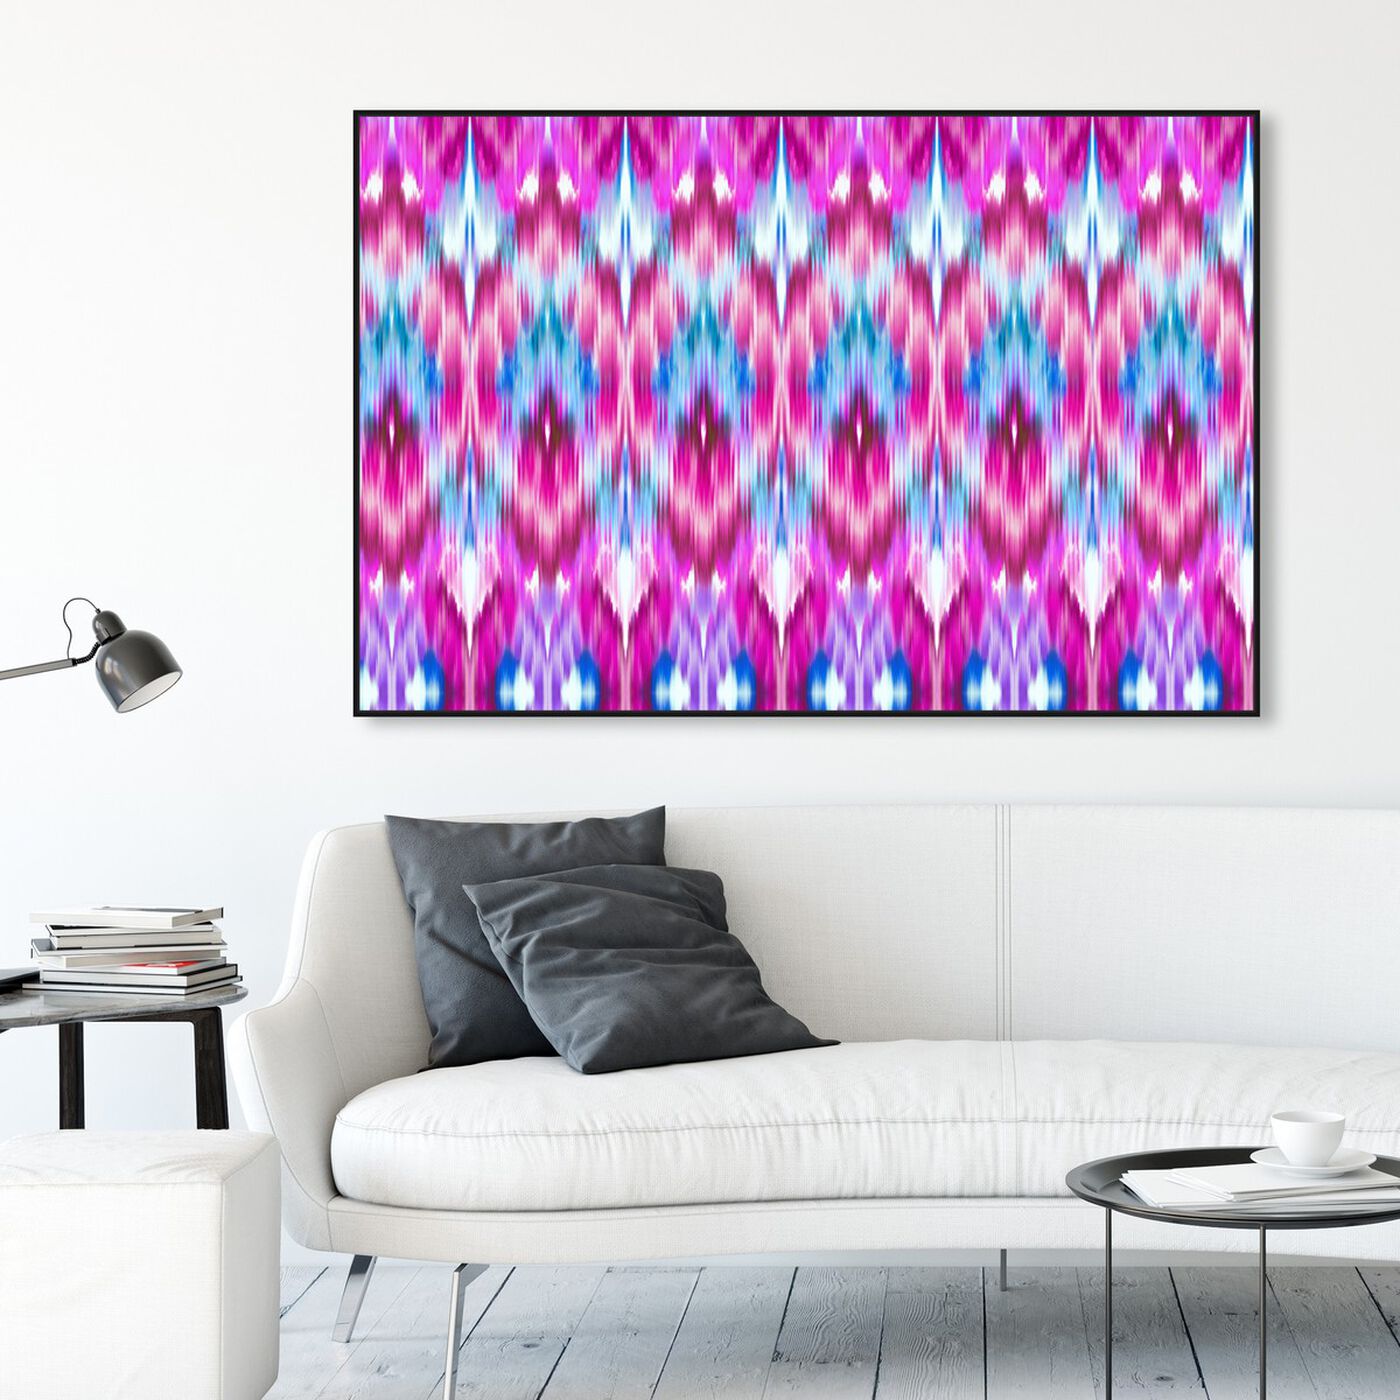 Hanging view of Hotter than Hot Pink featuring abstract and patterns art.